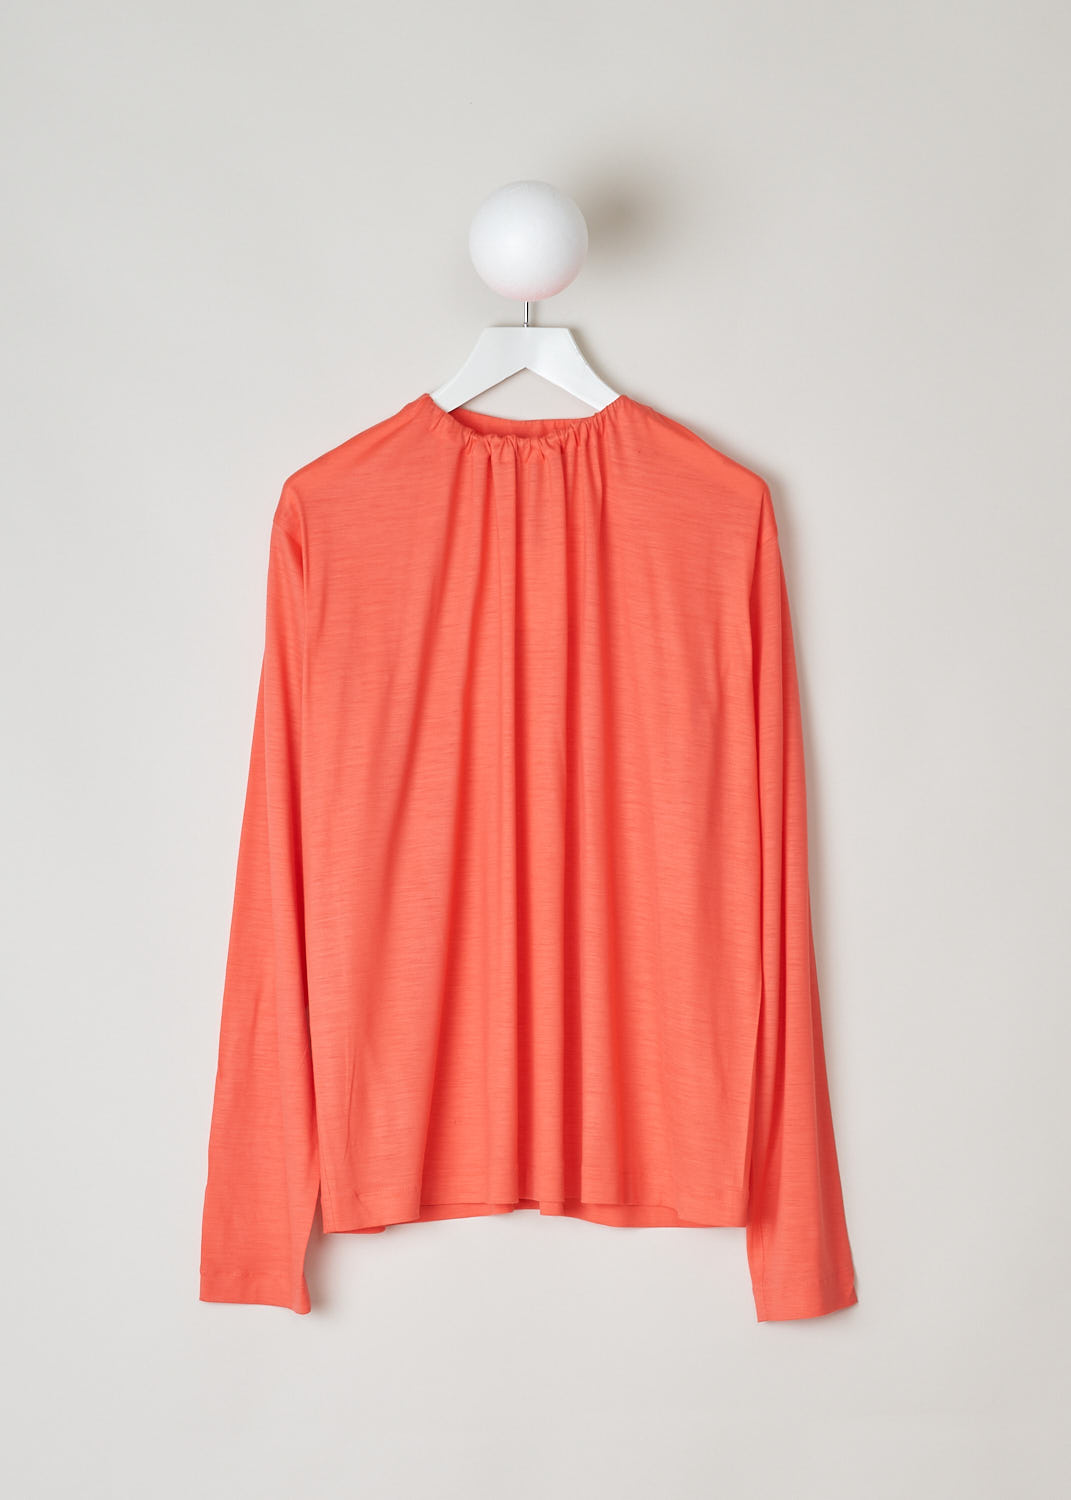 SOFIE Dâ€™HOORE, LONG SLEEVE CORAL TOP, BRIANNA_WOJE_CORAL, Pink, Orange, Front, This coral colored top features a gathered elasticated neckline. The long sleeve top drapes the bodice, creating a relaxed fit. 
